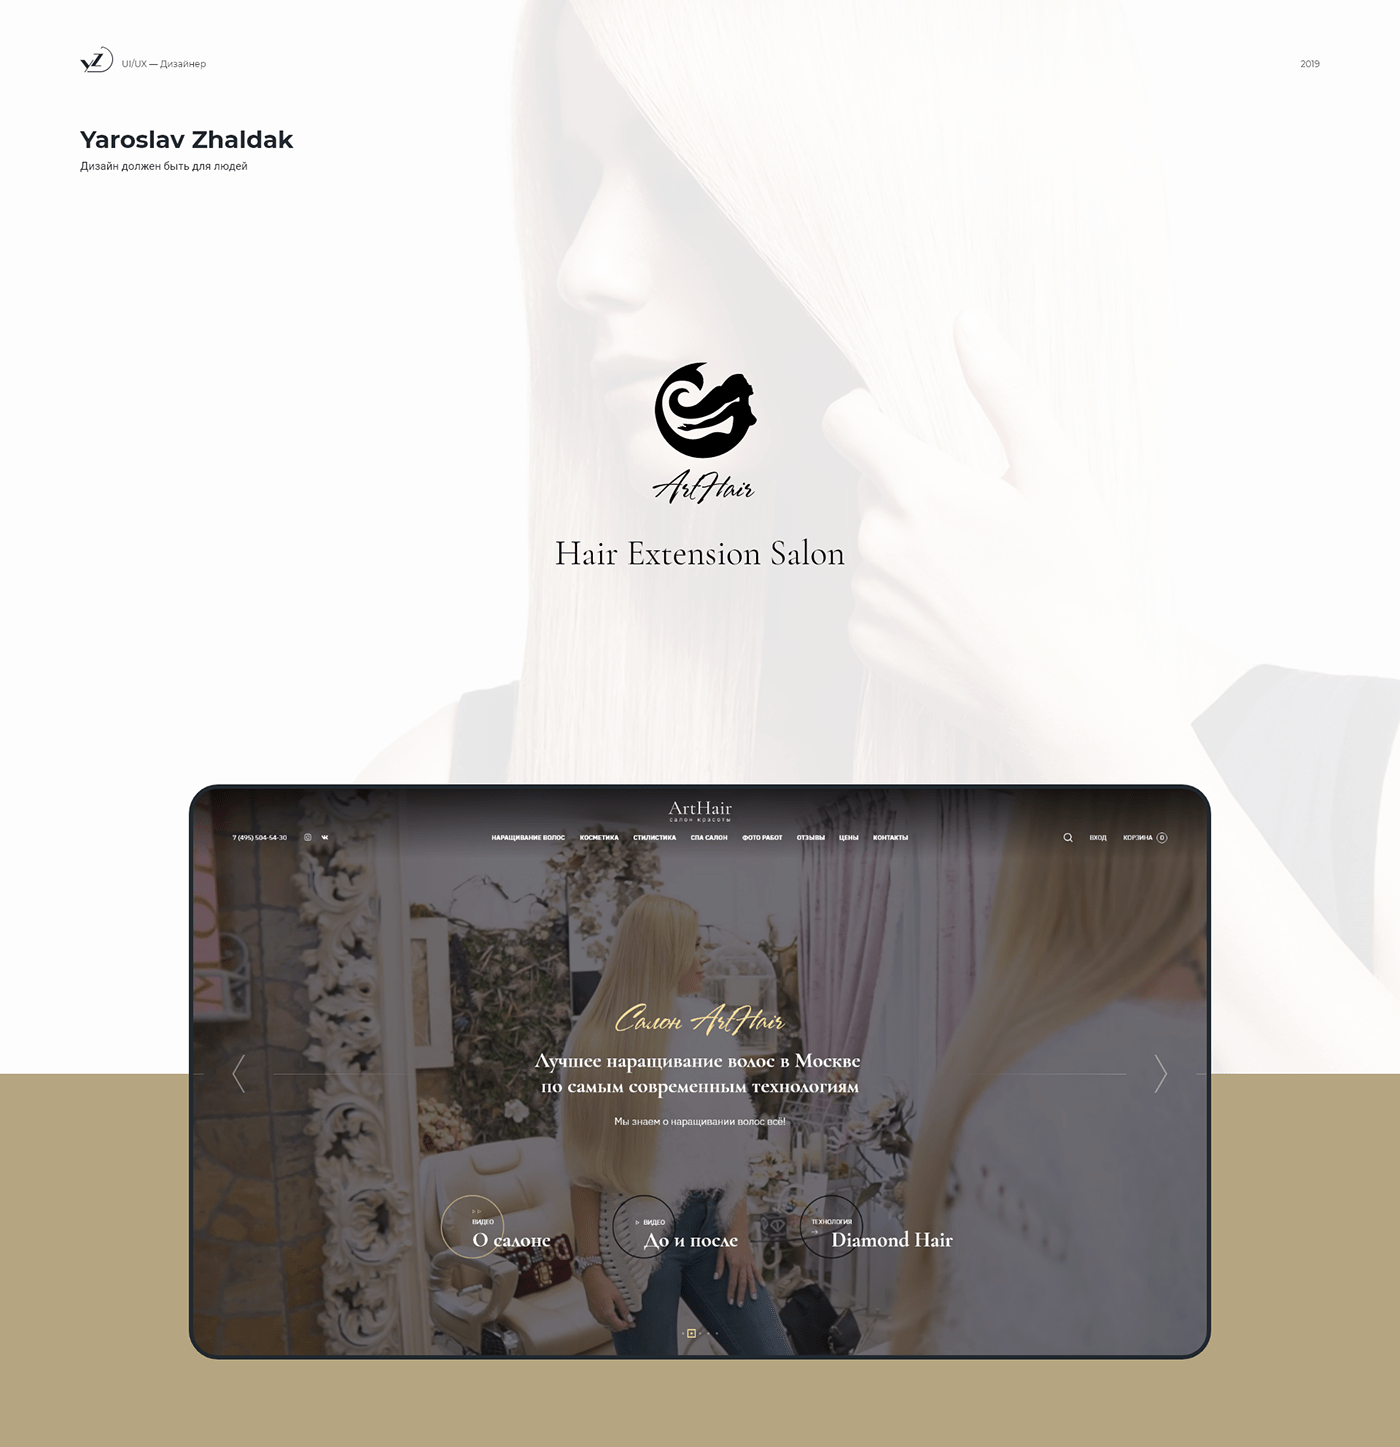 salon beauty redesigned site Website UI/UX Hair Extension